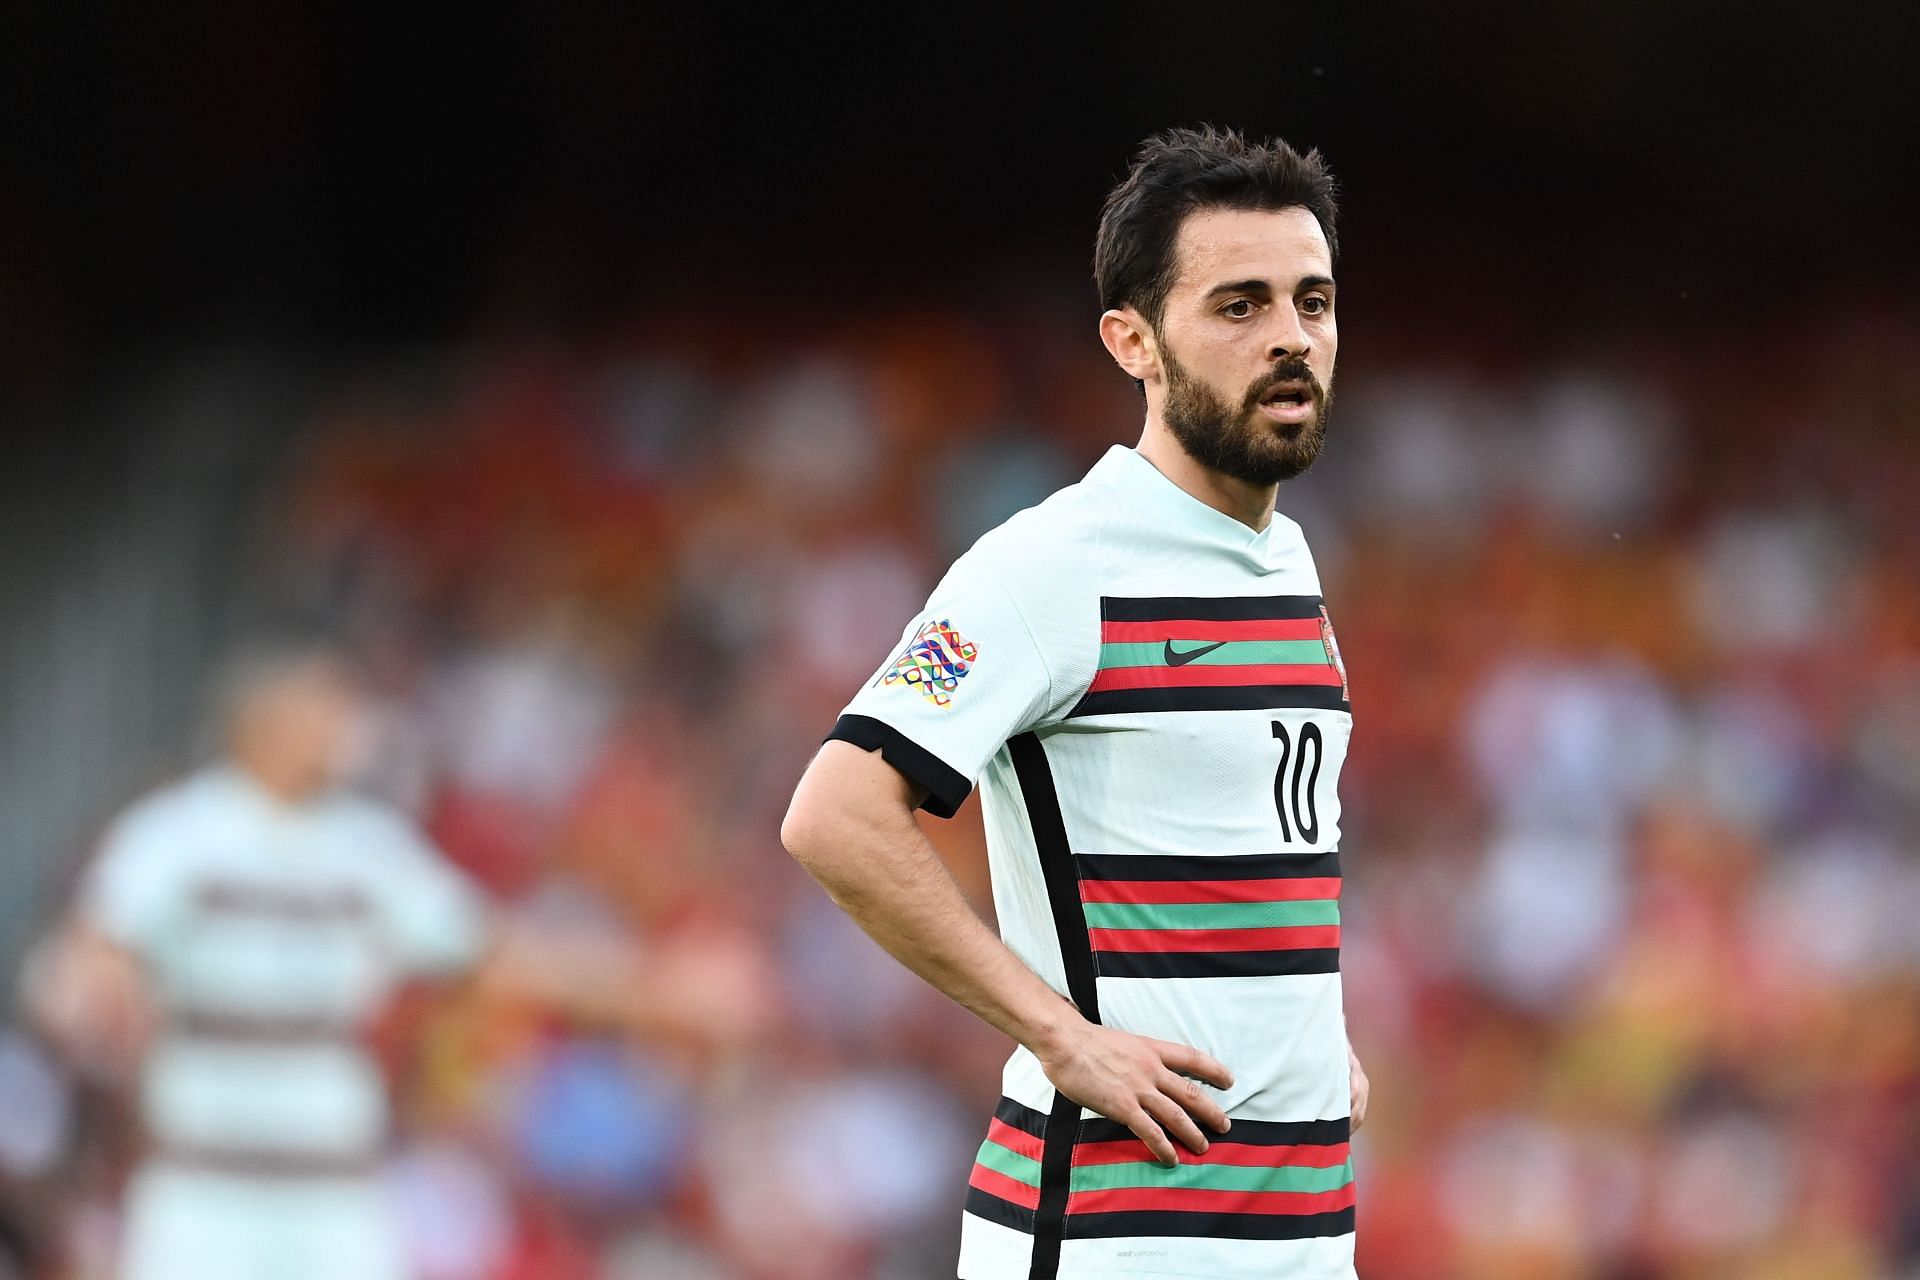 Bernardo Silva impressed once again for Portugal and played a key part in both goals.